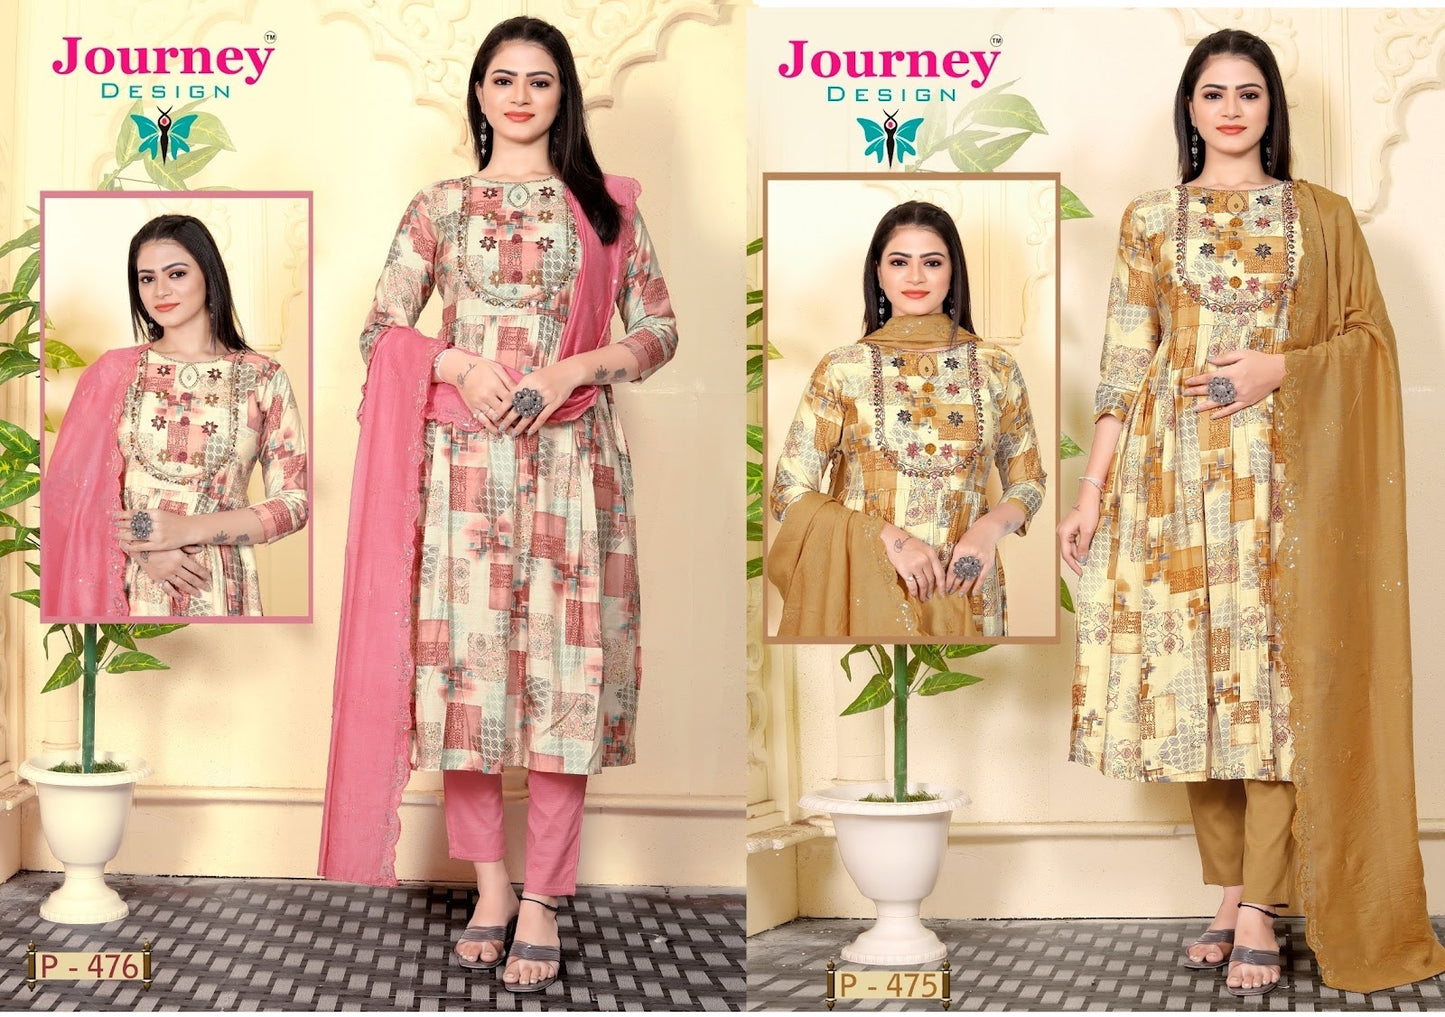 P 475 N 476 Journey Design Chanderi Readymade Pant Style Suits